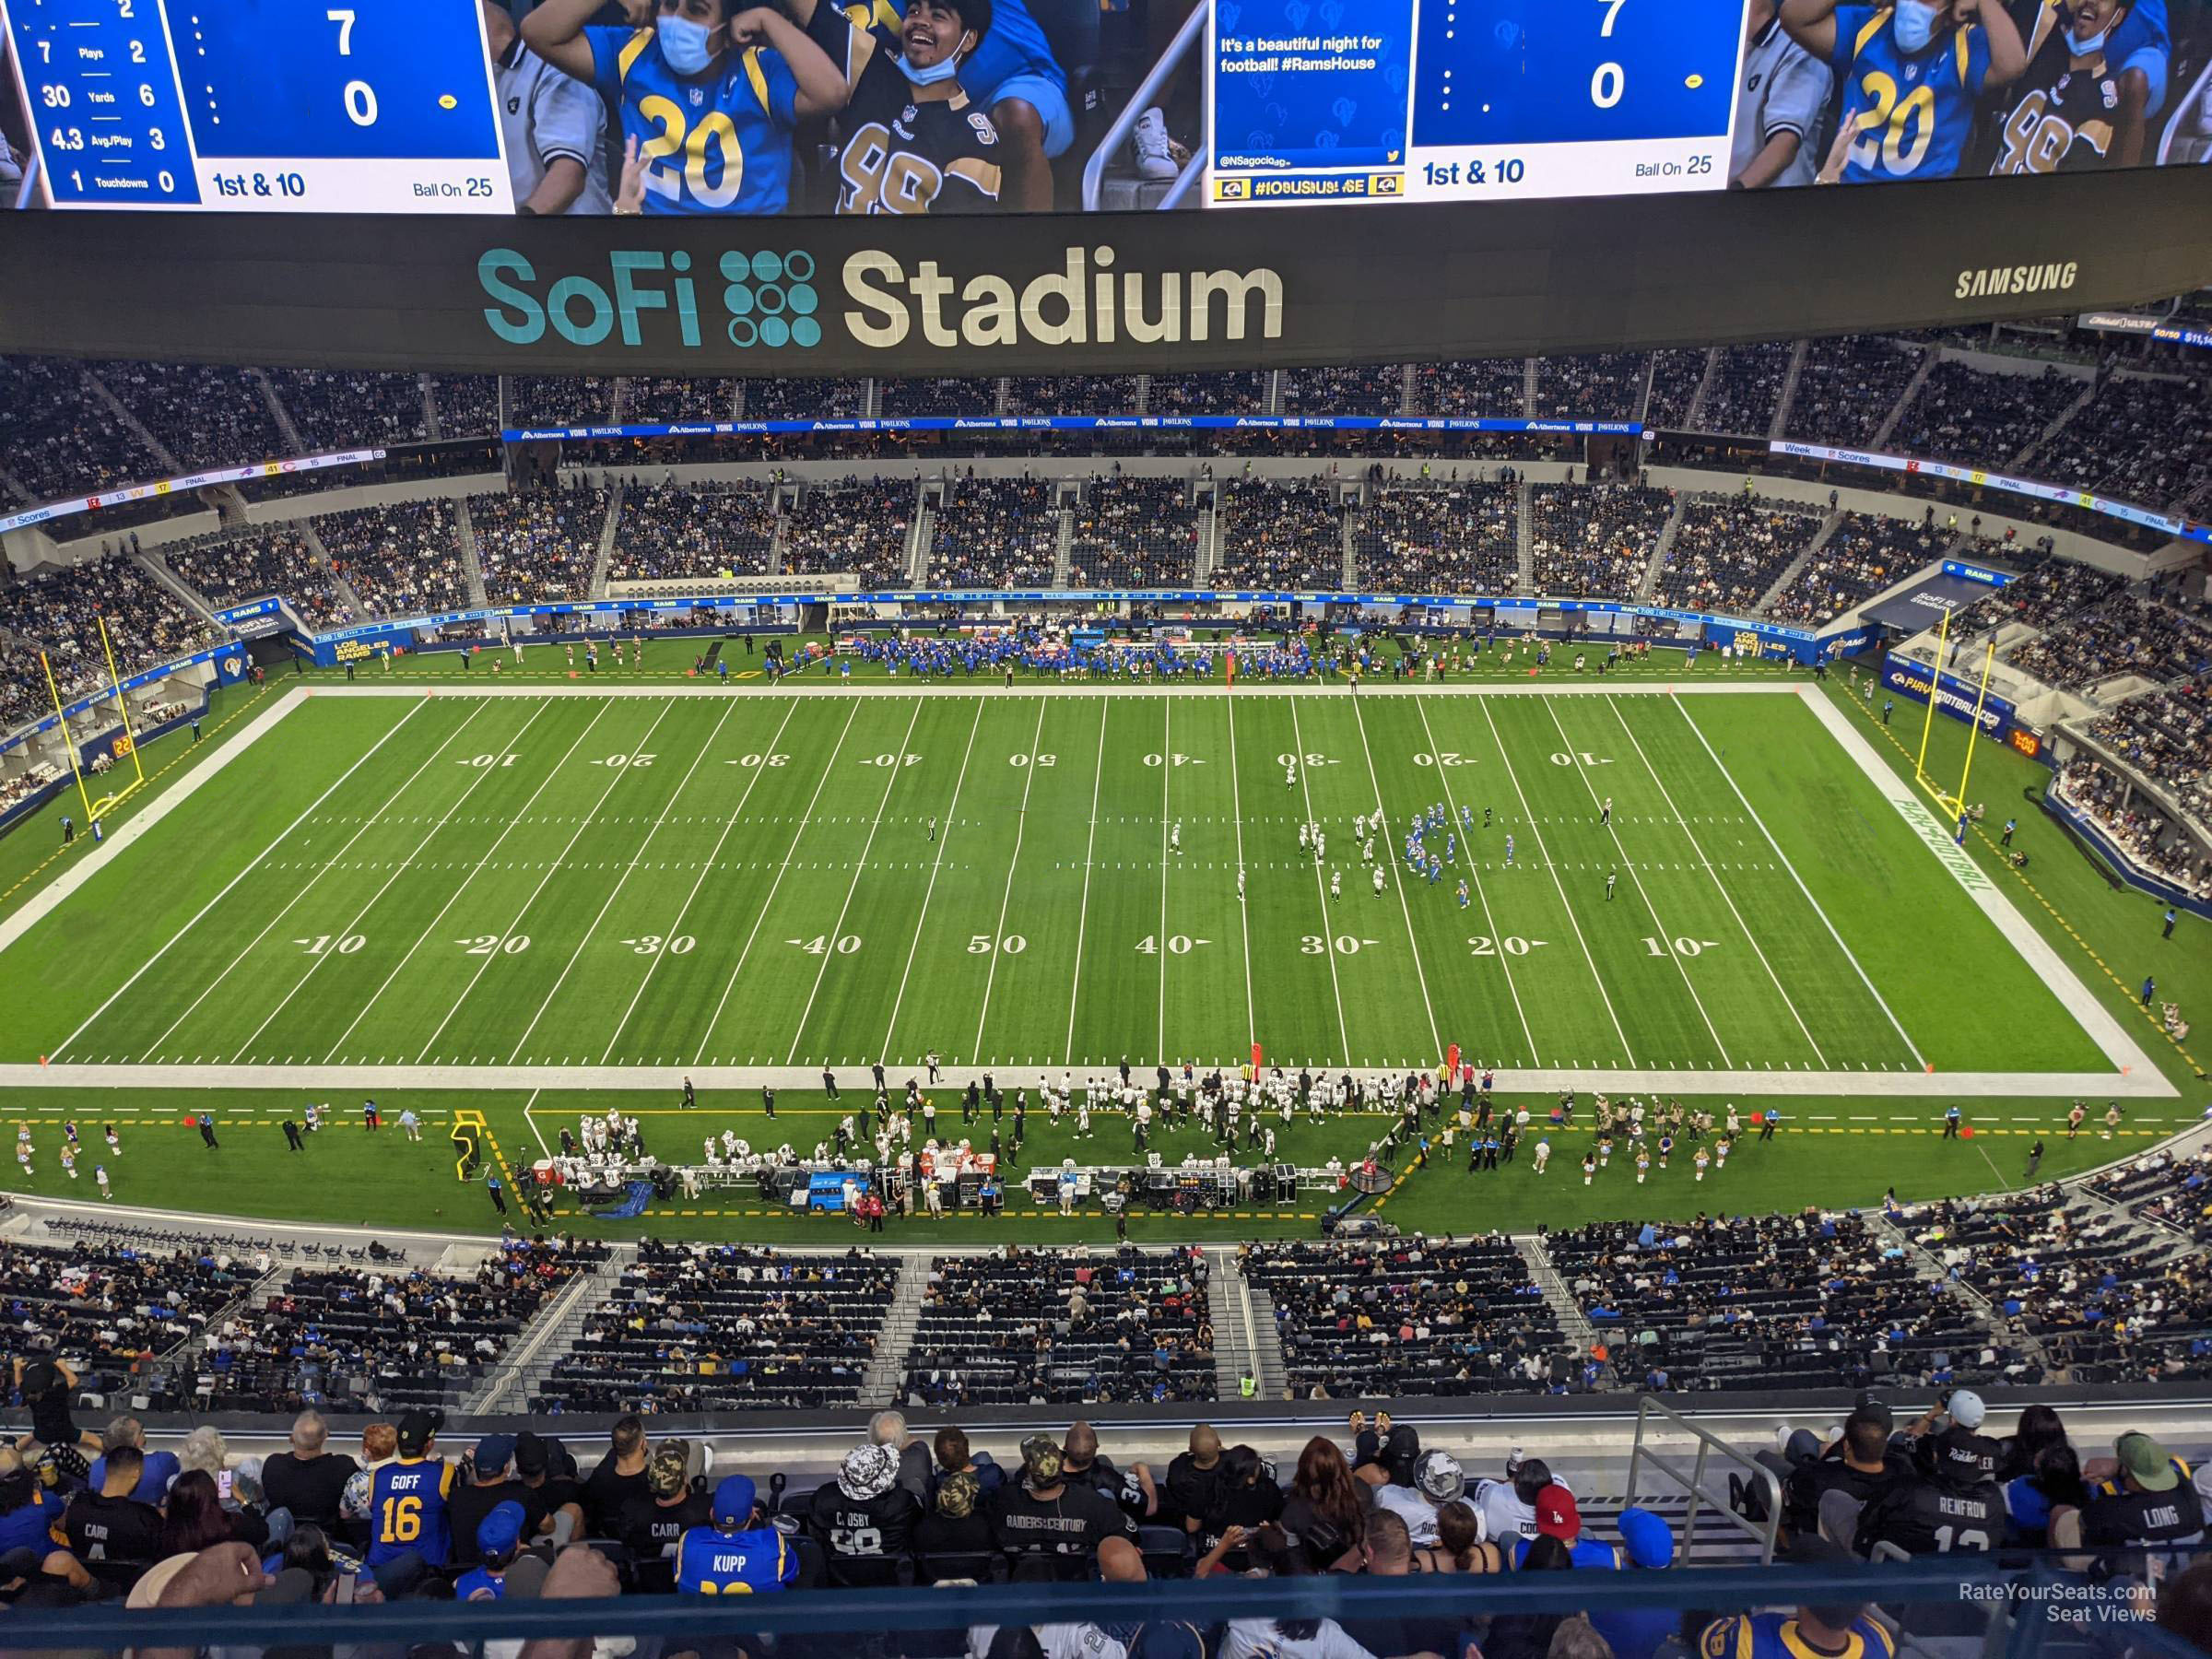 Take a virtual tour of SoFi Stadium with views from every section